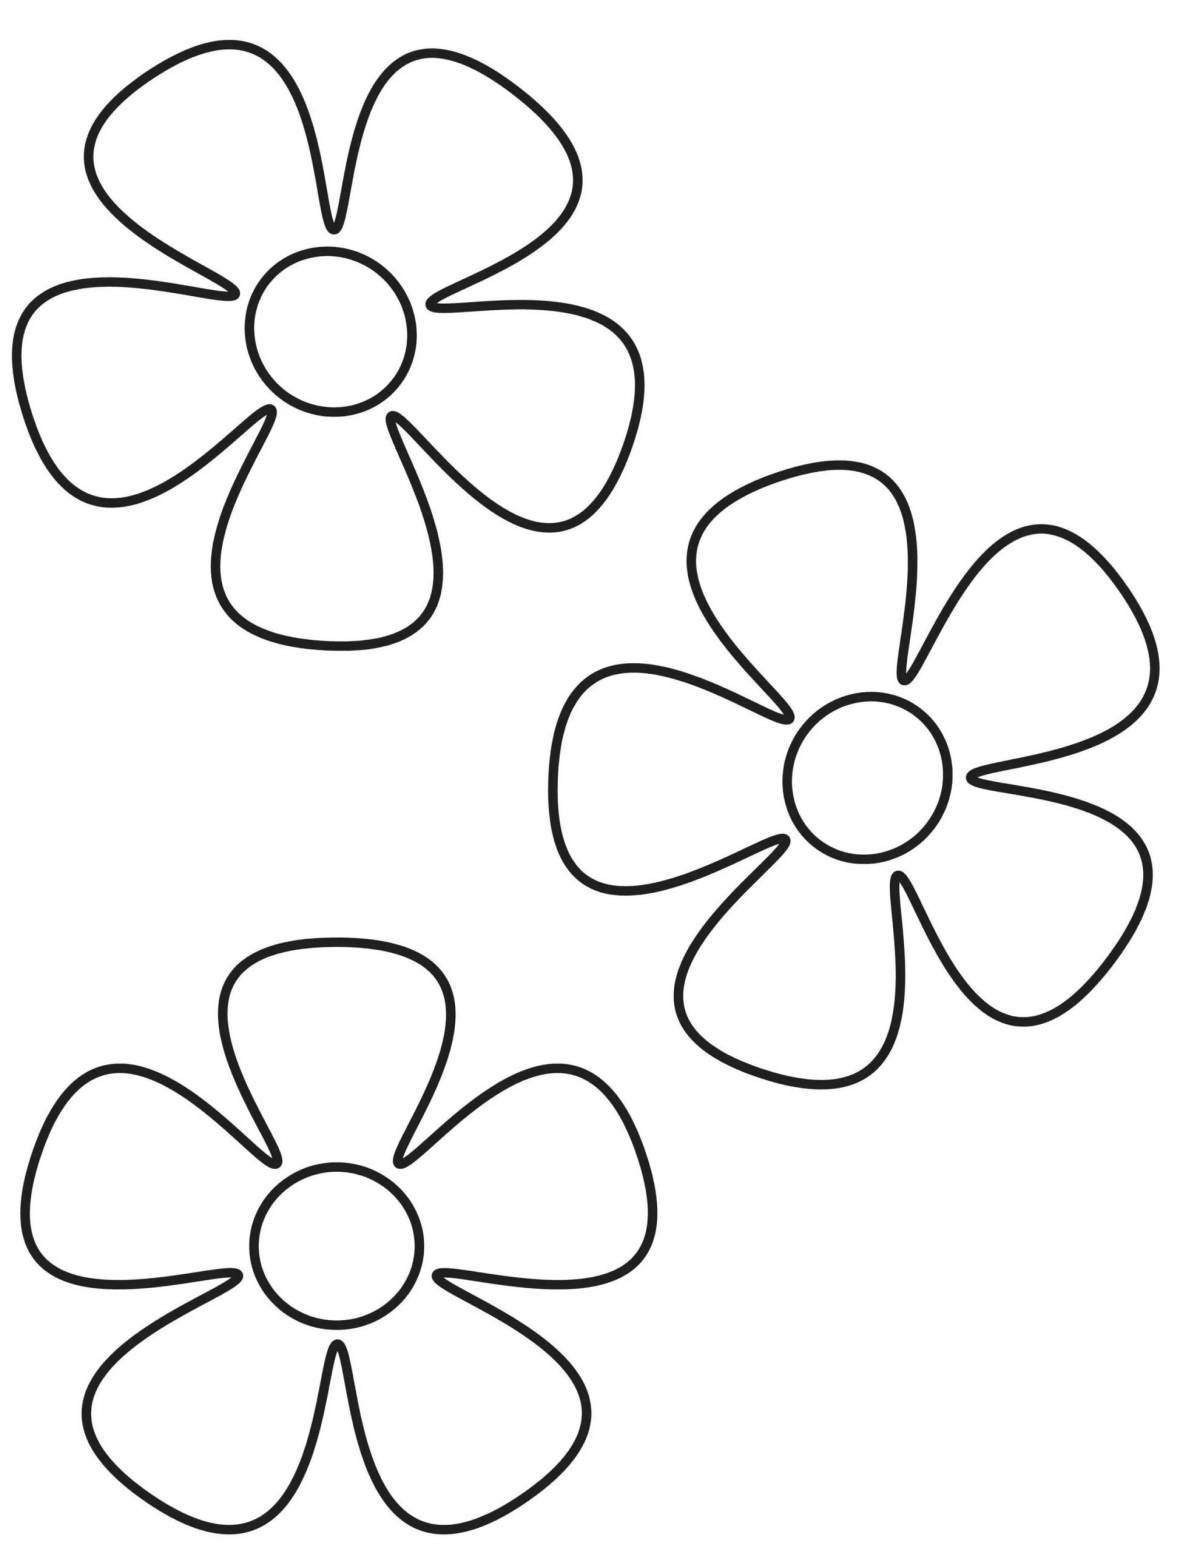 Fascinating flower coloring book for kids